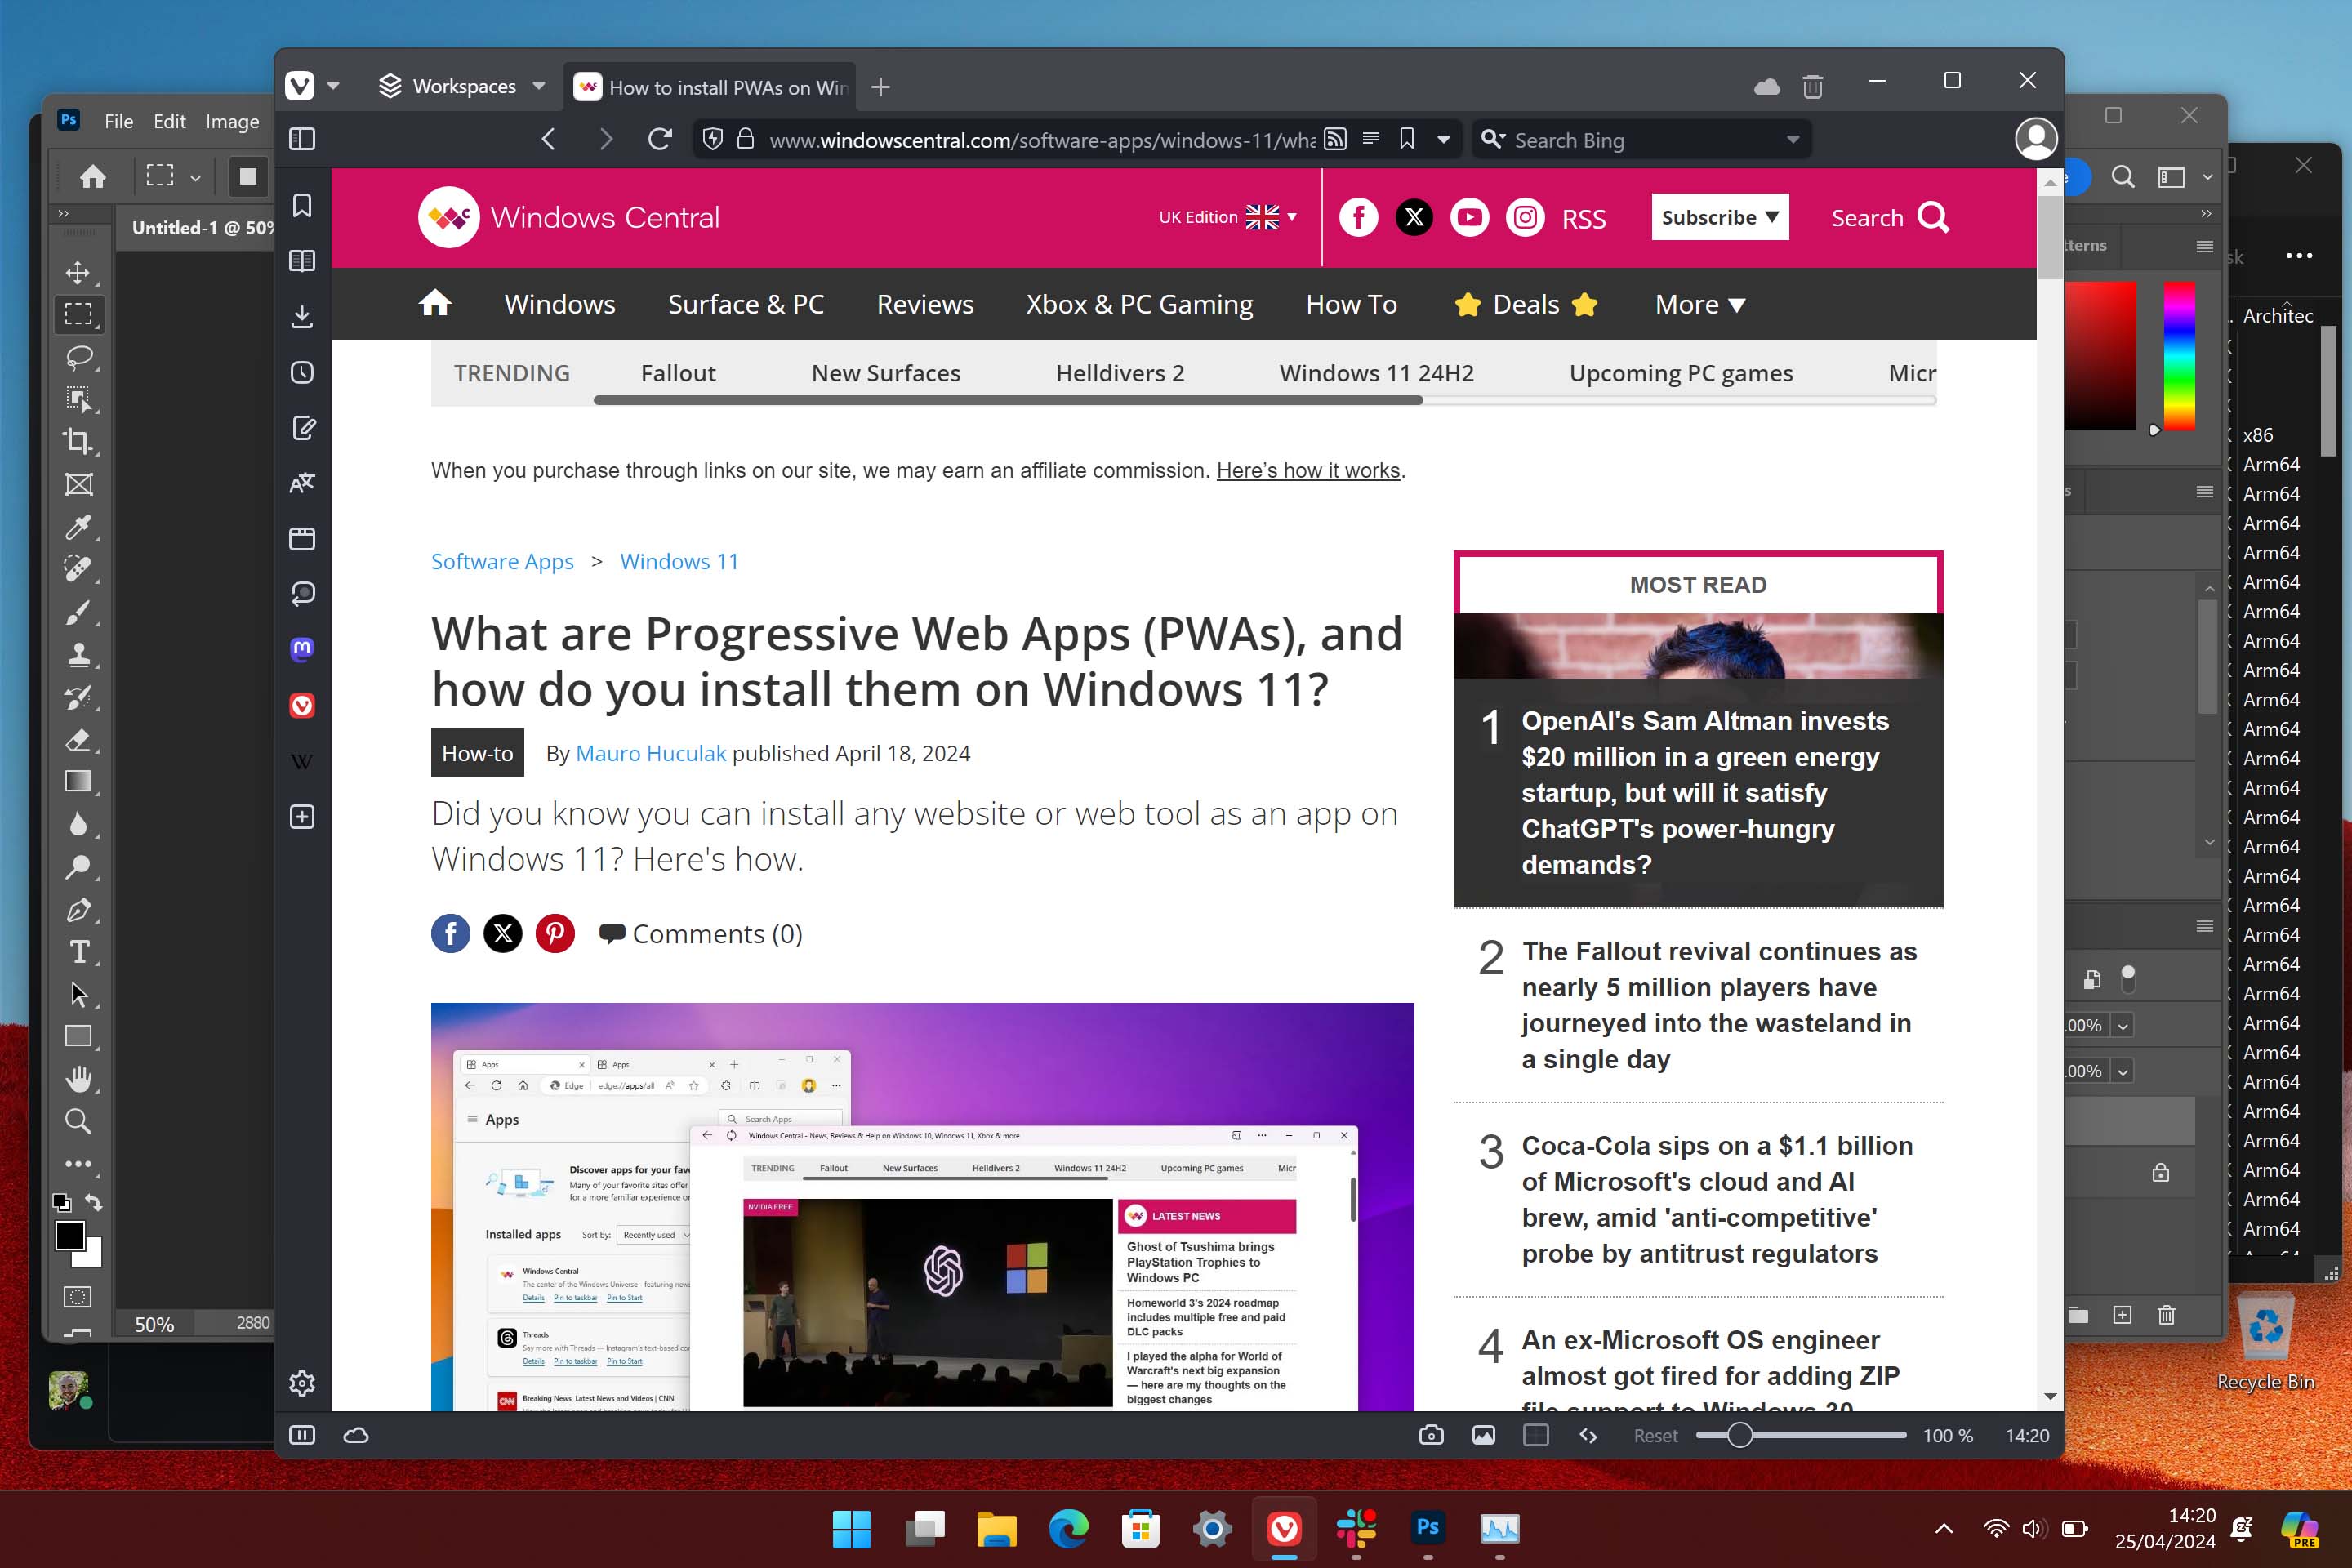 Spotify, Slack, Adobe Photoshop, and Vivaldi browser running on a Surface Pro X